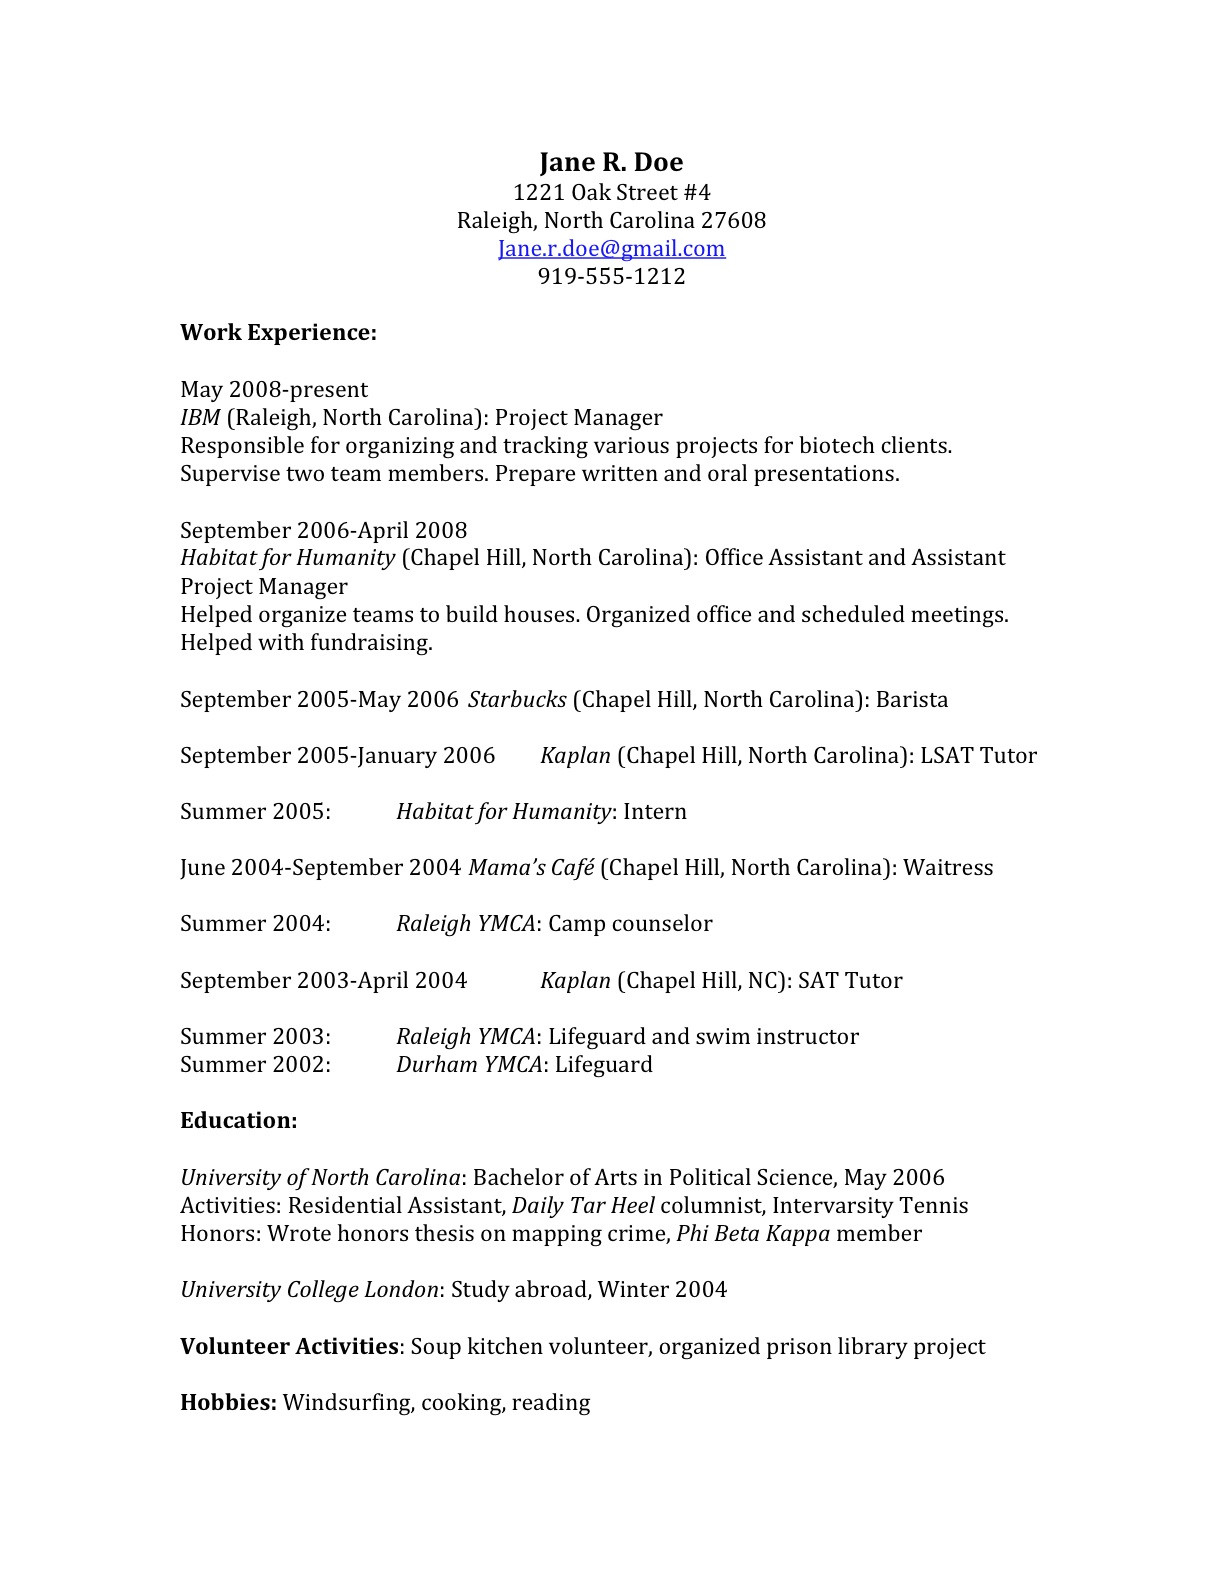 Law School Application Resume Template Download How to Craft A Law School Application that Gets You In: Sample …